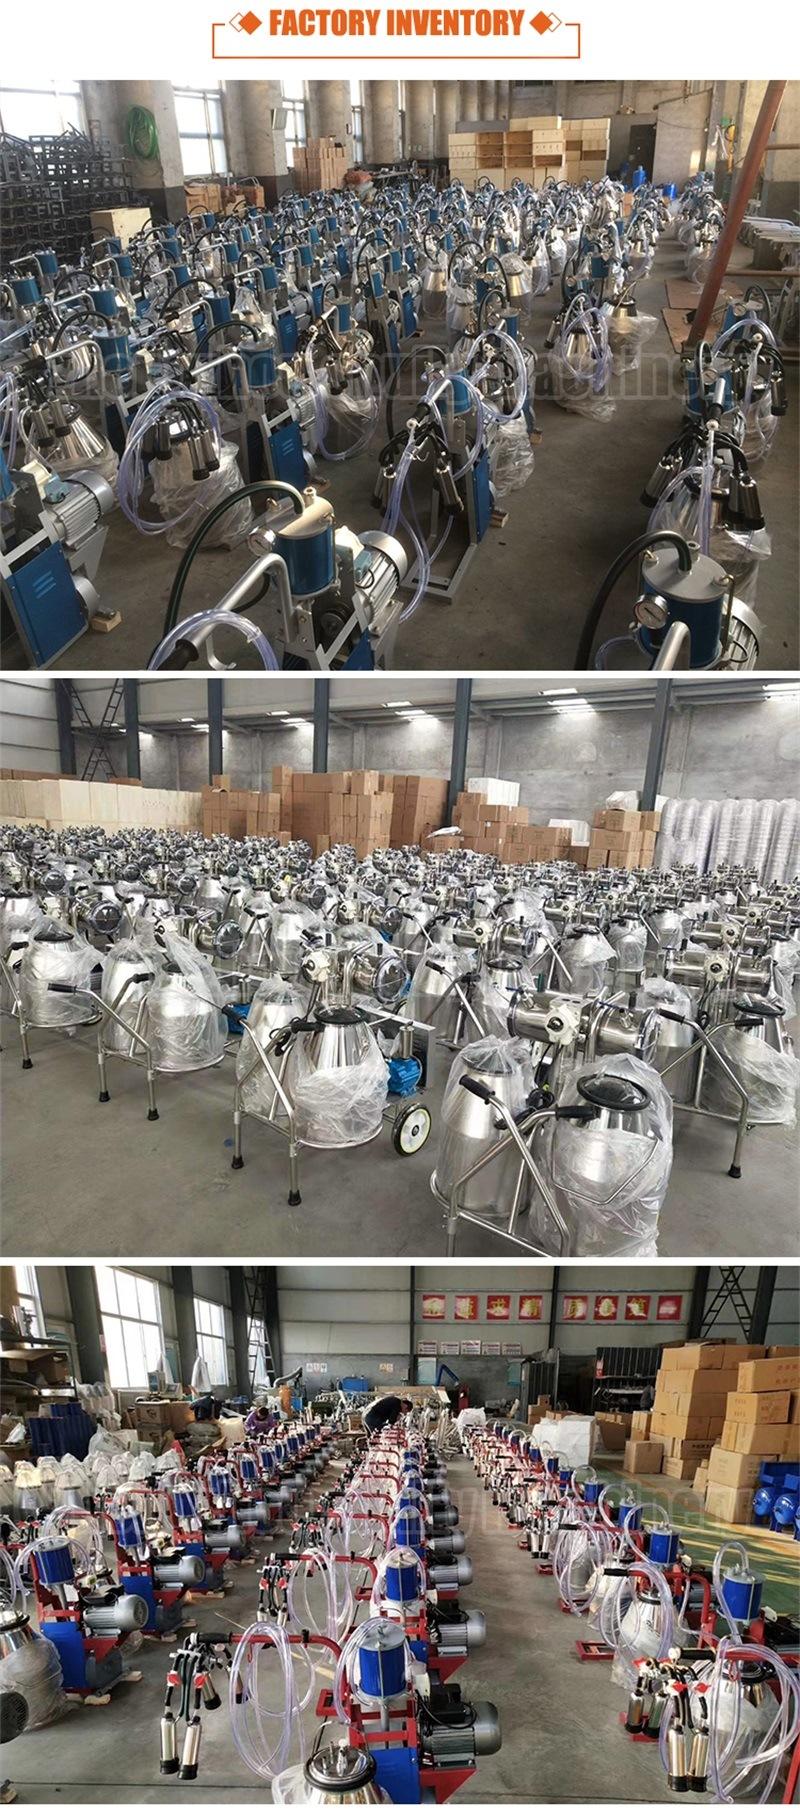 Automatic Sheep Milking Machine Hand Milking Machine for Cows and Goats